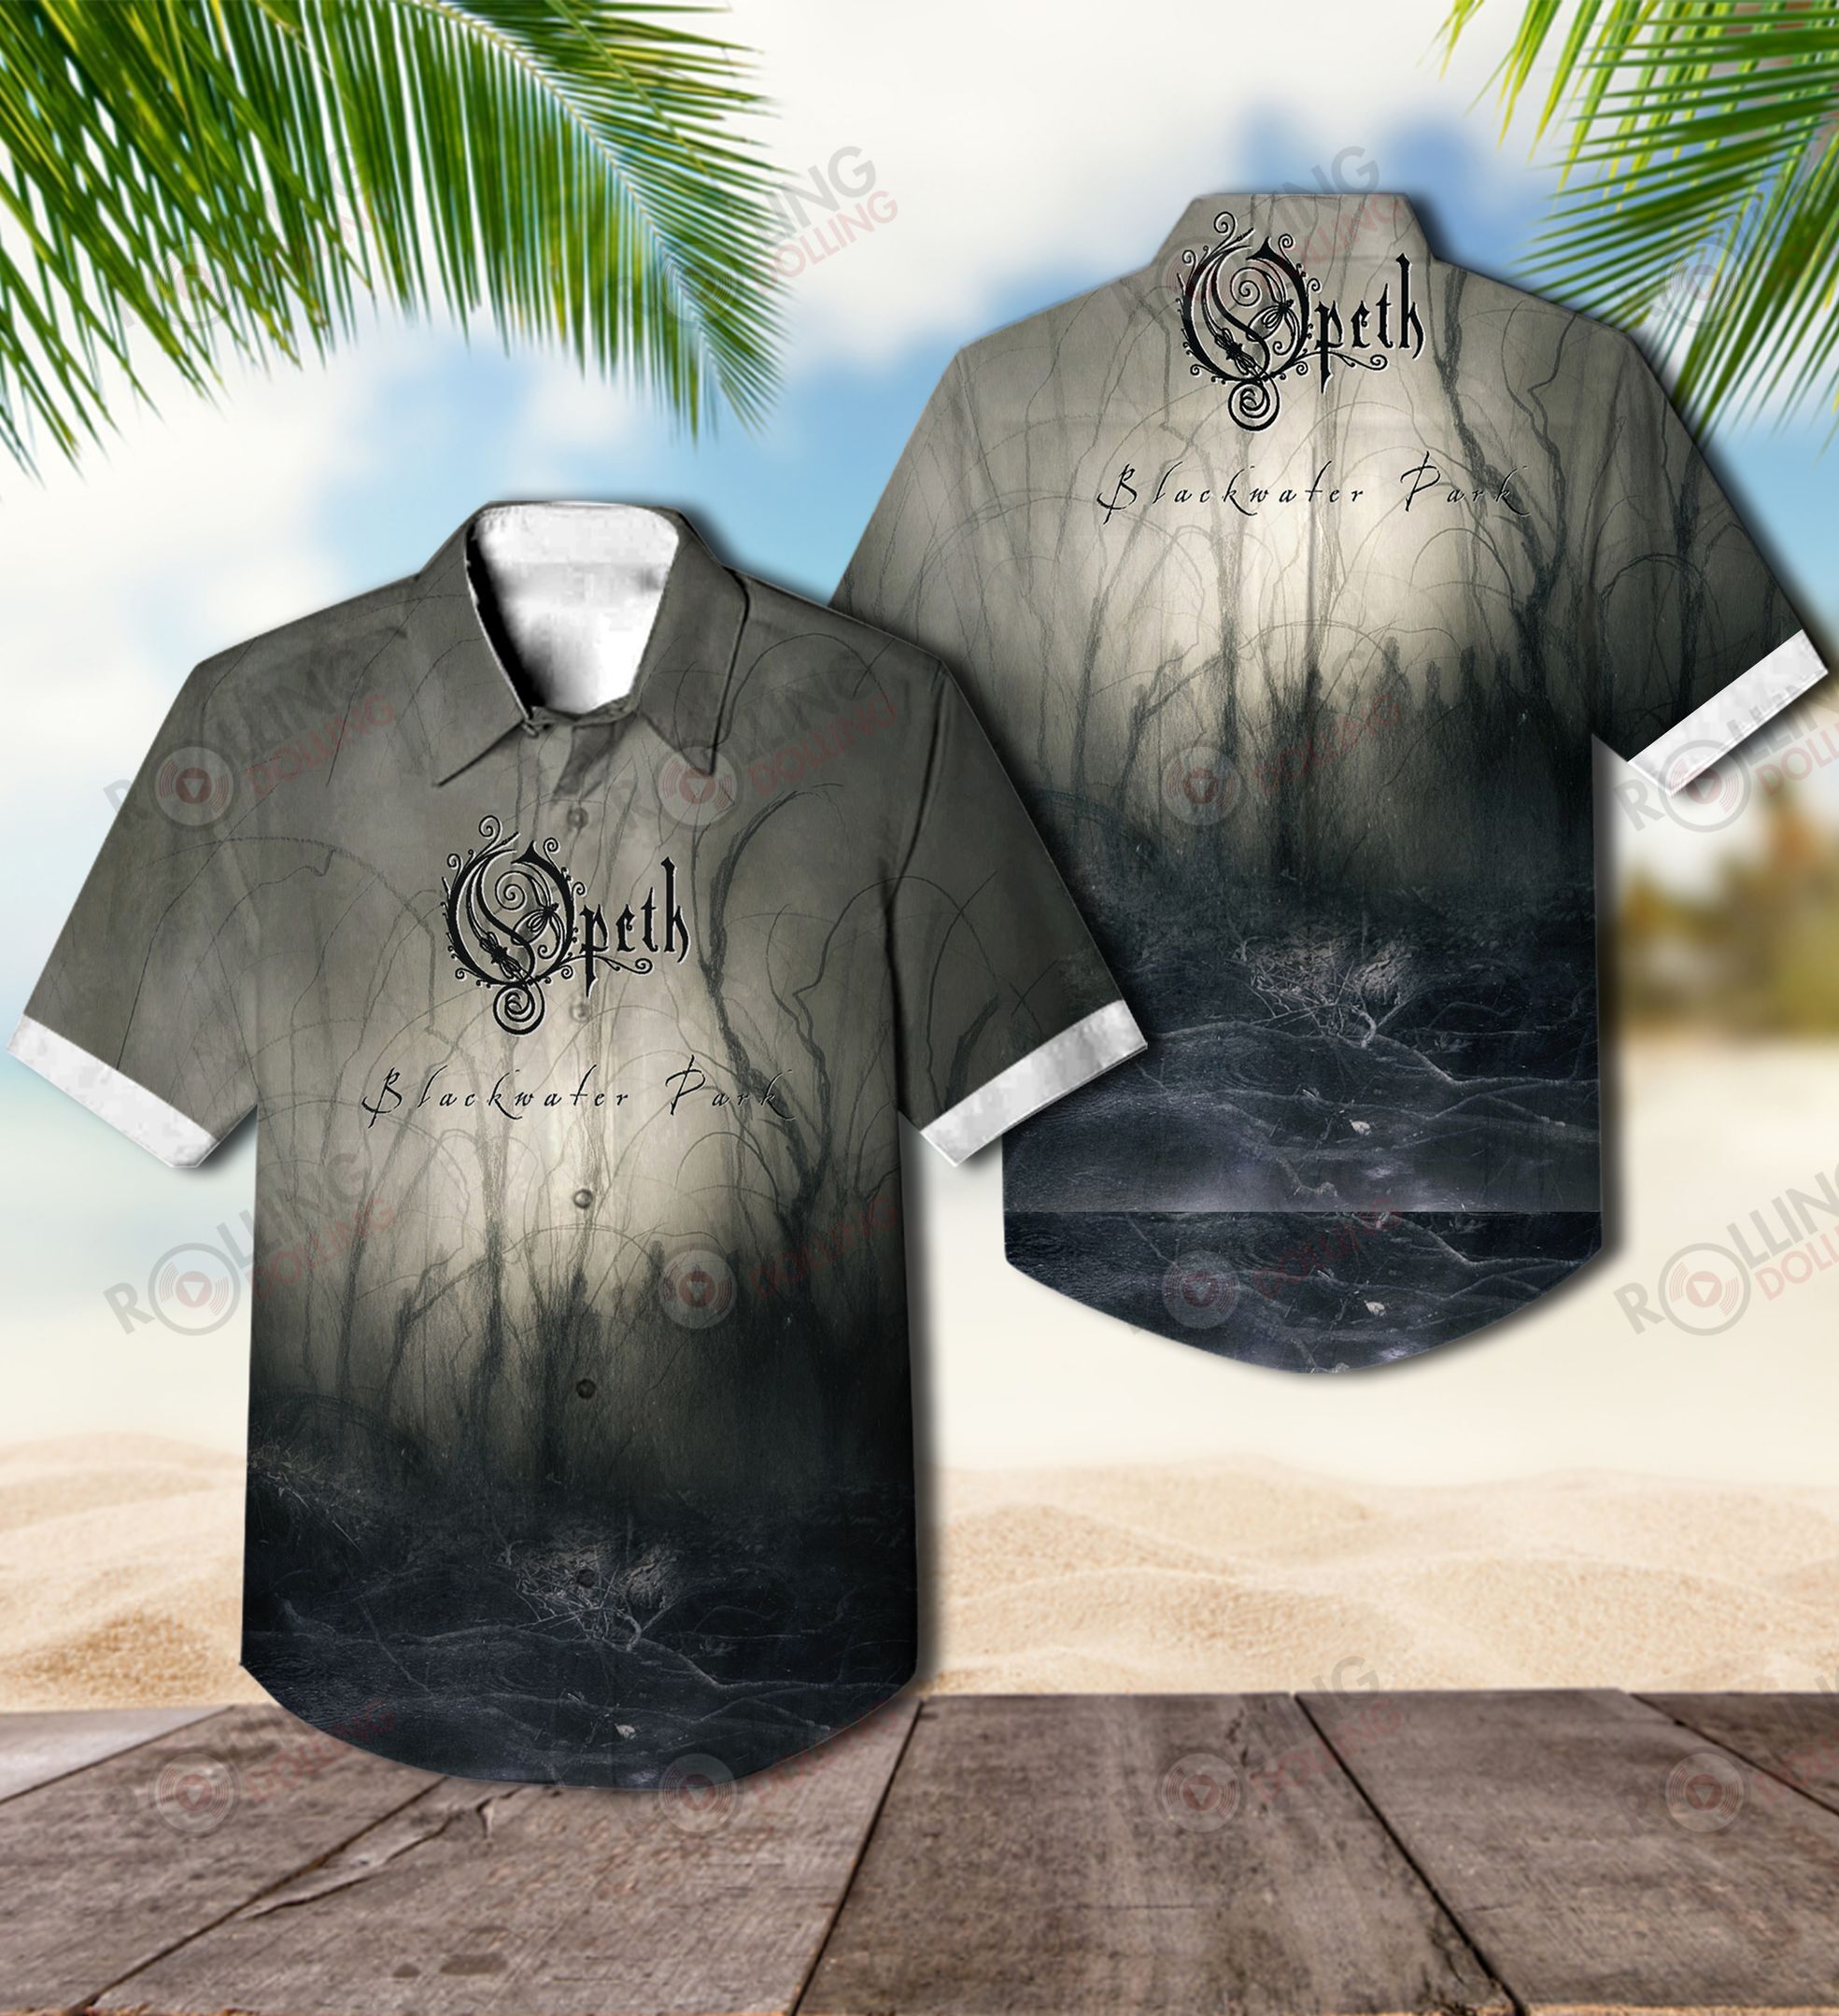 This would make a great gift for any fan who loves Hawaiian Shirt as well as Rock band 8